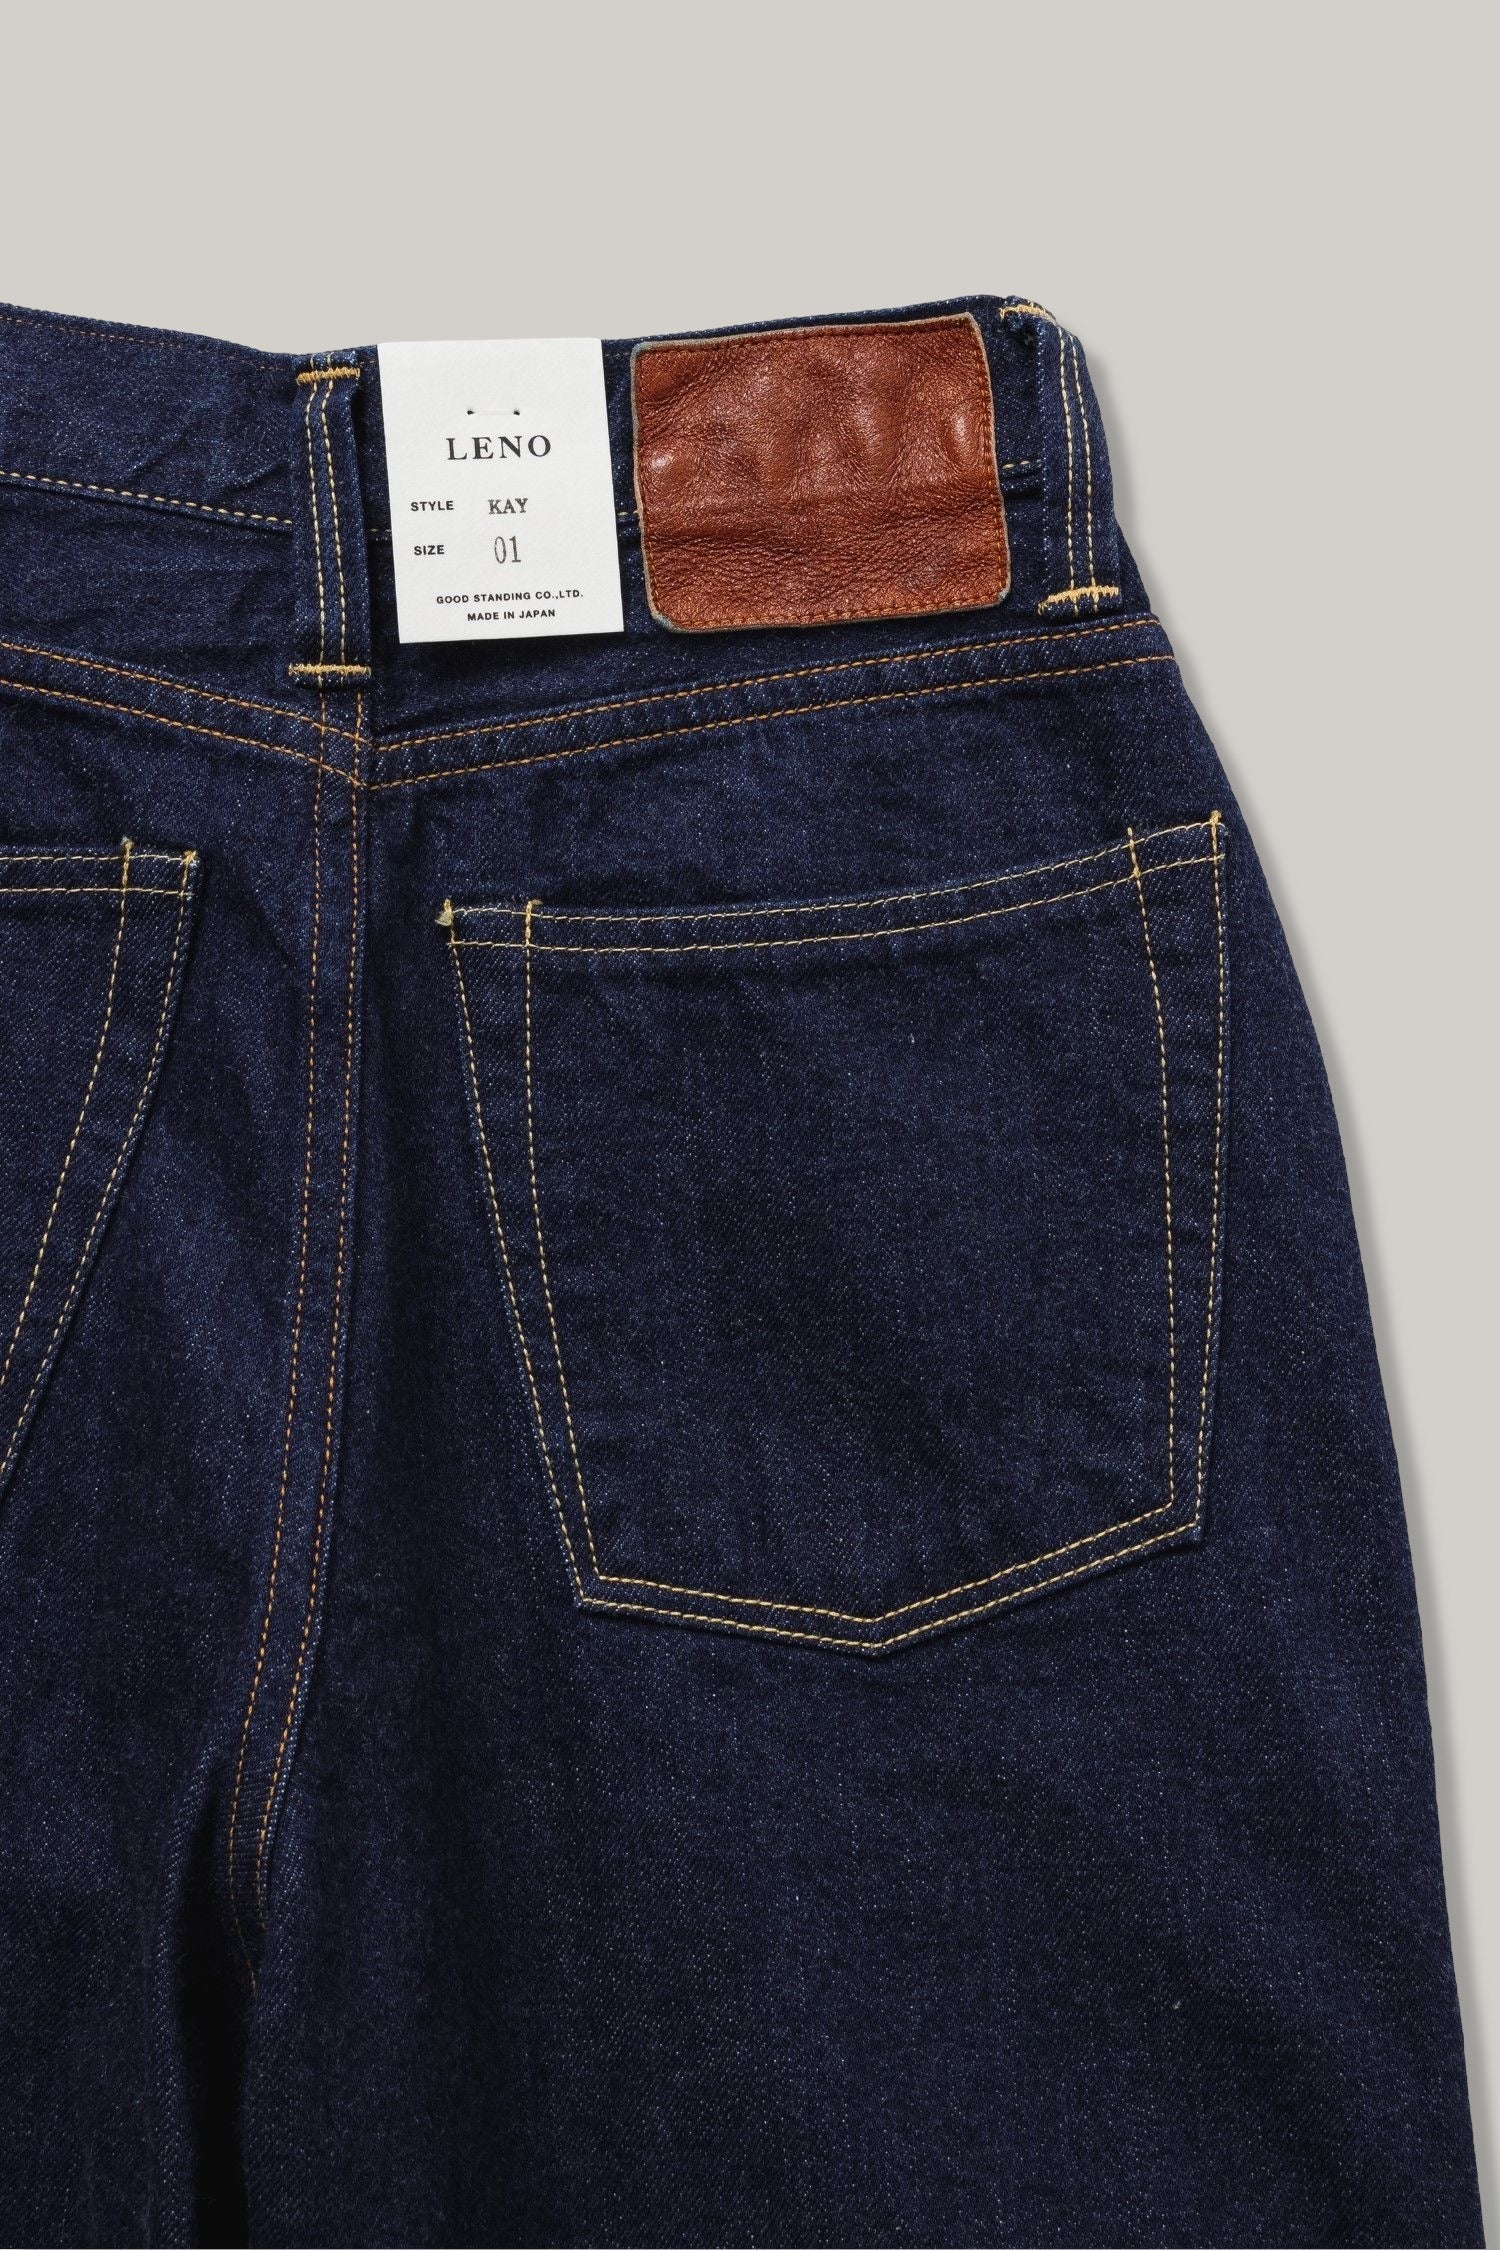 LENO KAY HIGH WAIST JEANS – Pickings and Parry